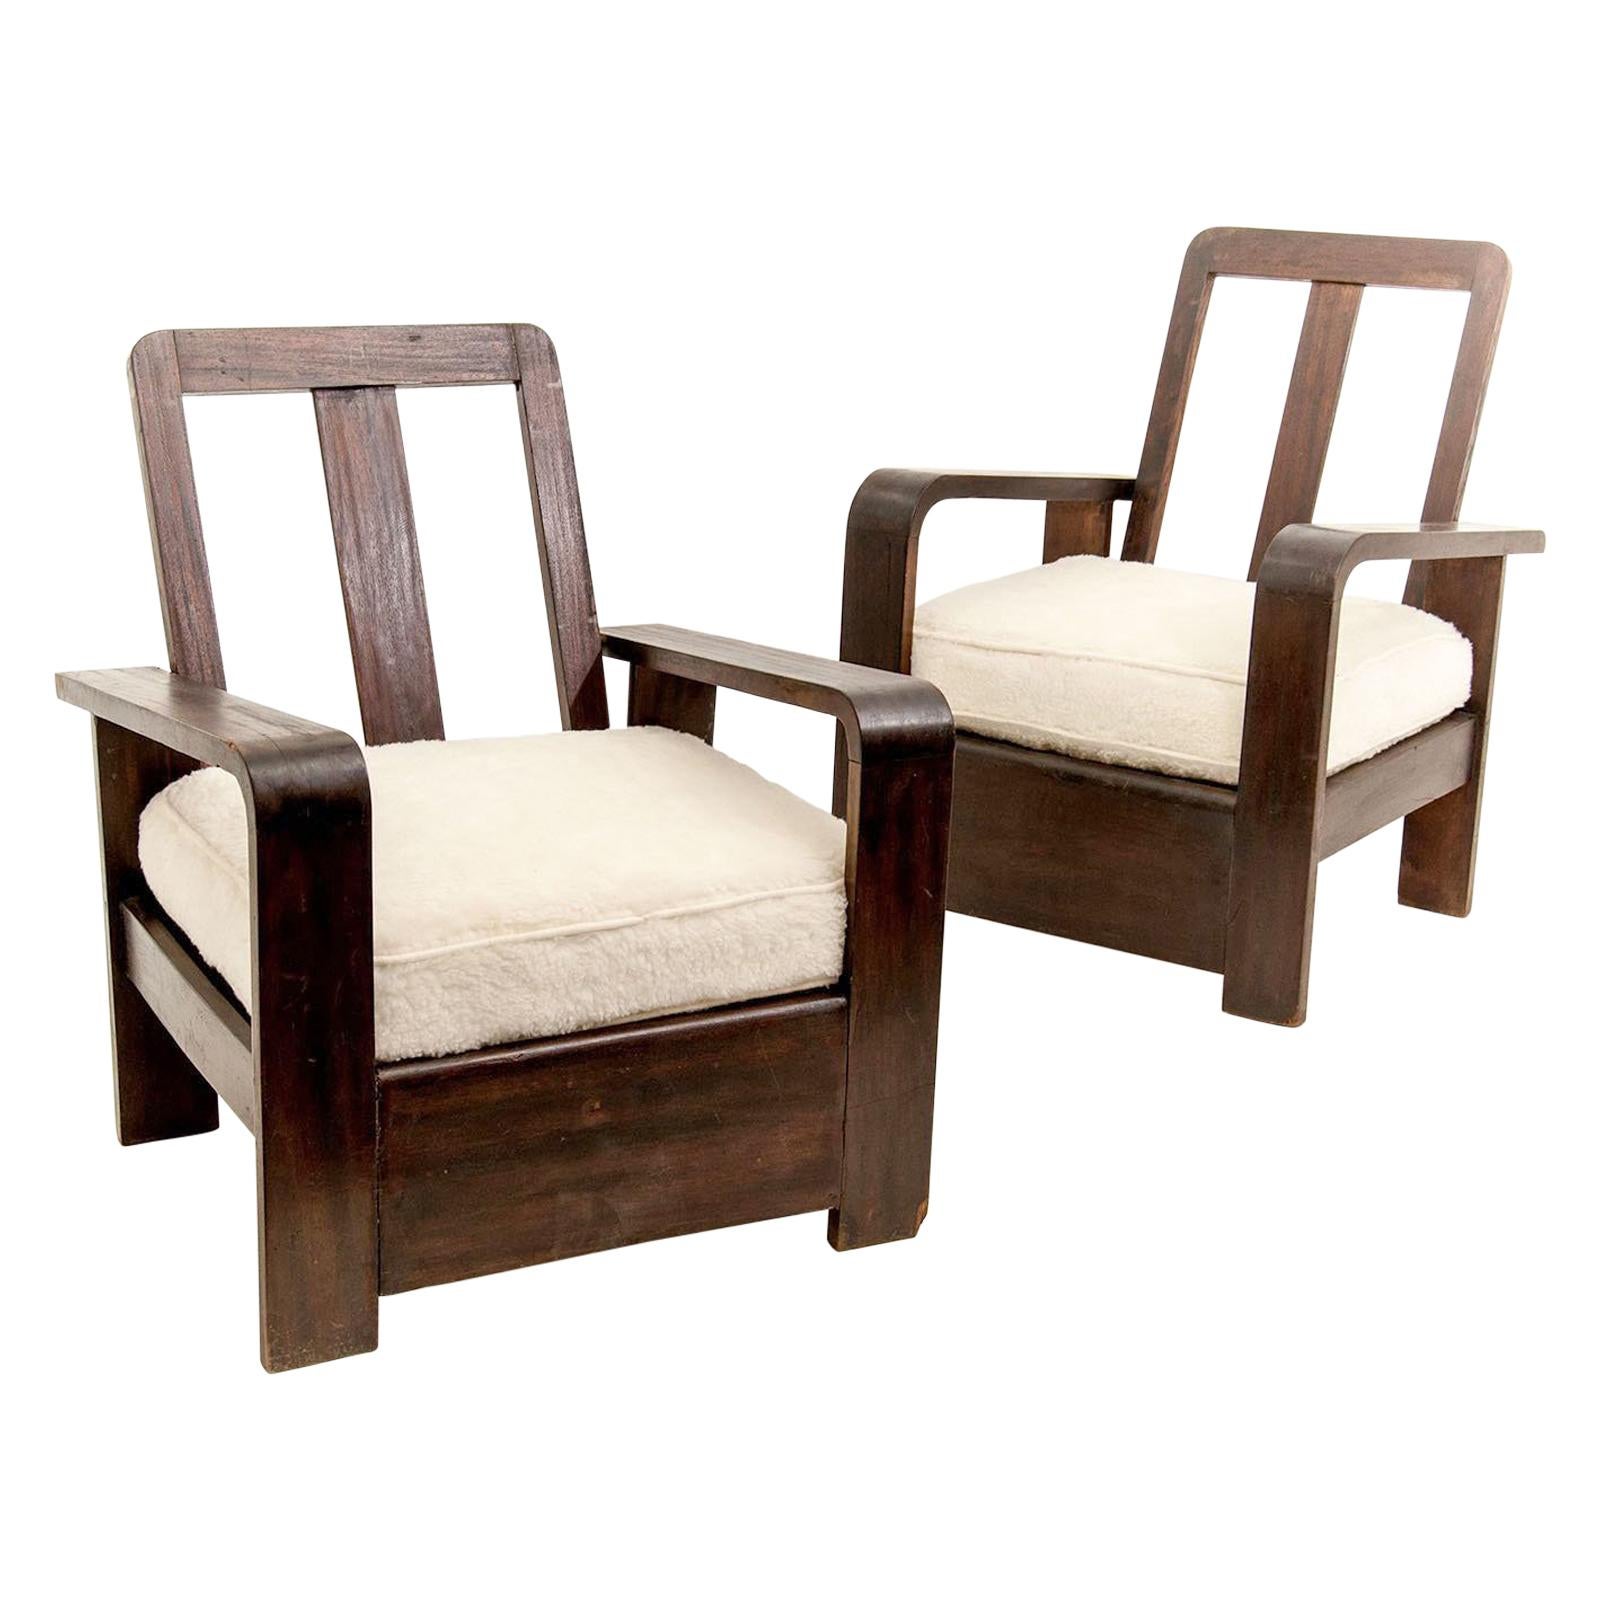 Constructivism Armchairs, circa 1950, with White Peluche Fabric, in Brown Wood